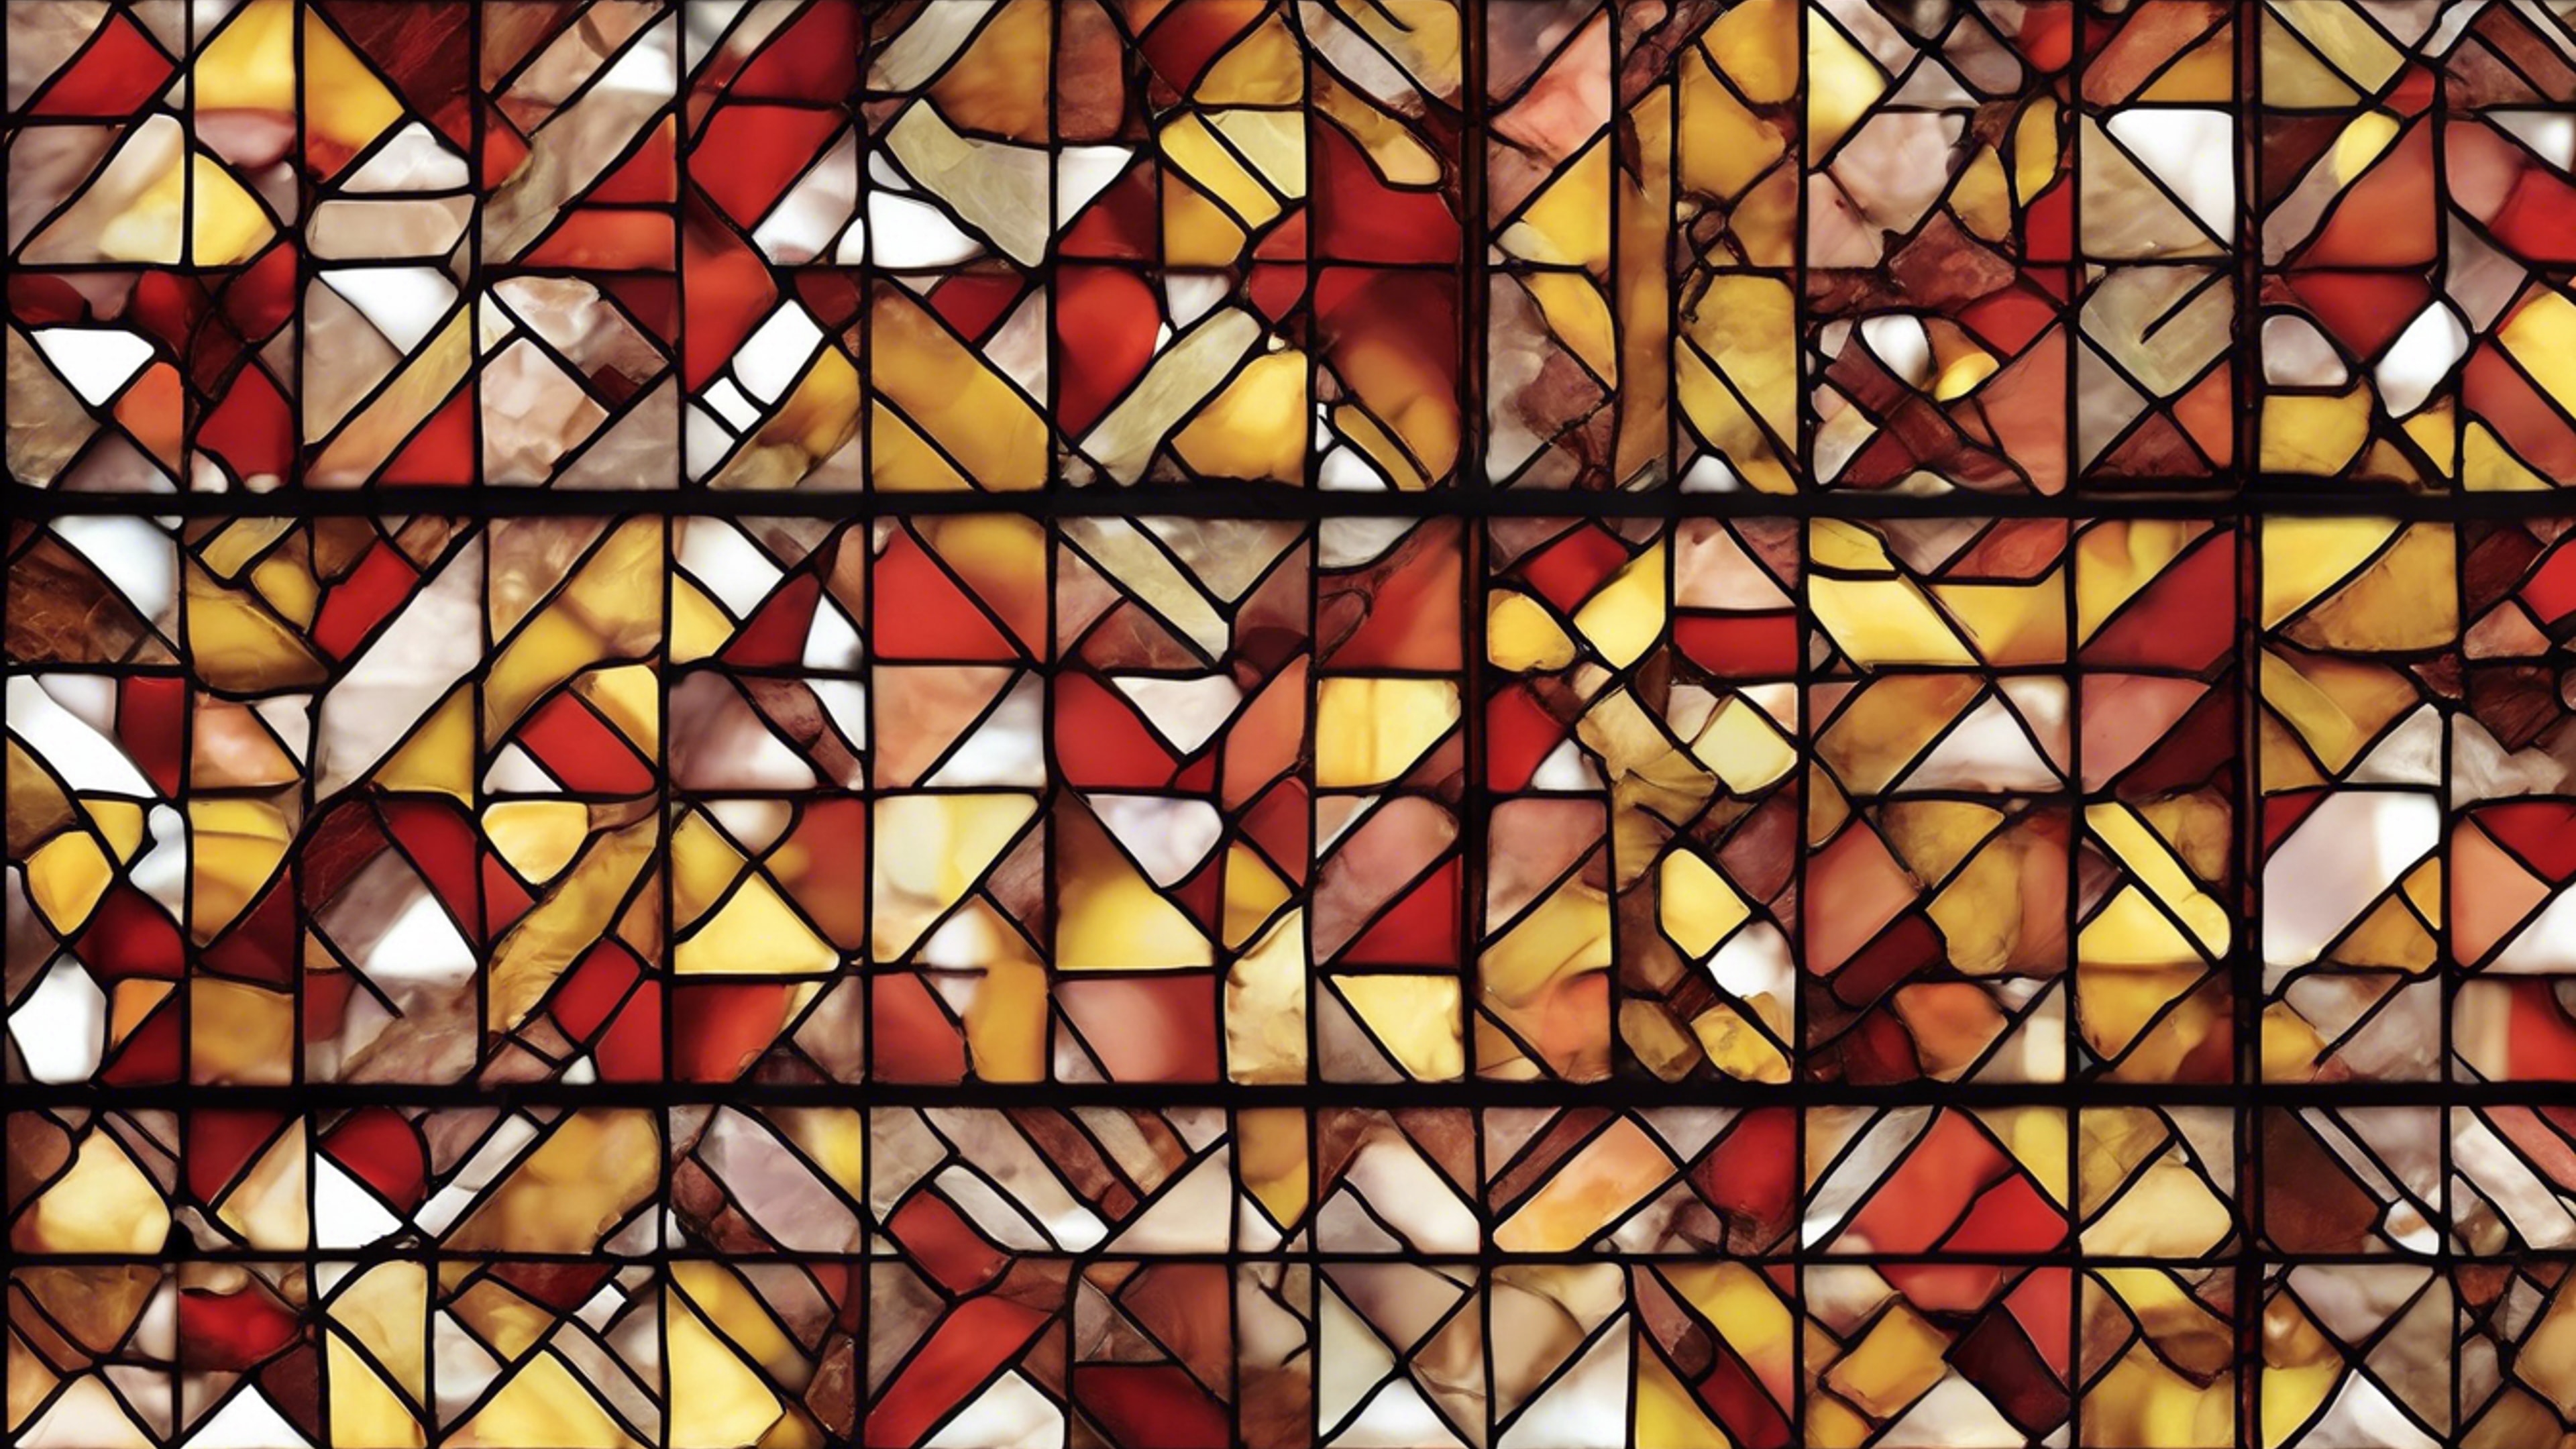 A stained glass design using a repeating motif of red and yellow bricks. Валлпапер[d98aa8b1ebac46789cc9]